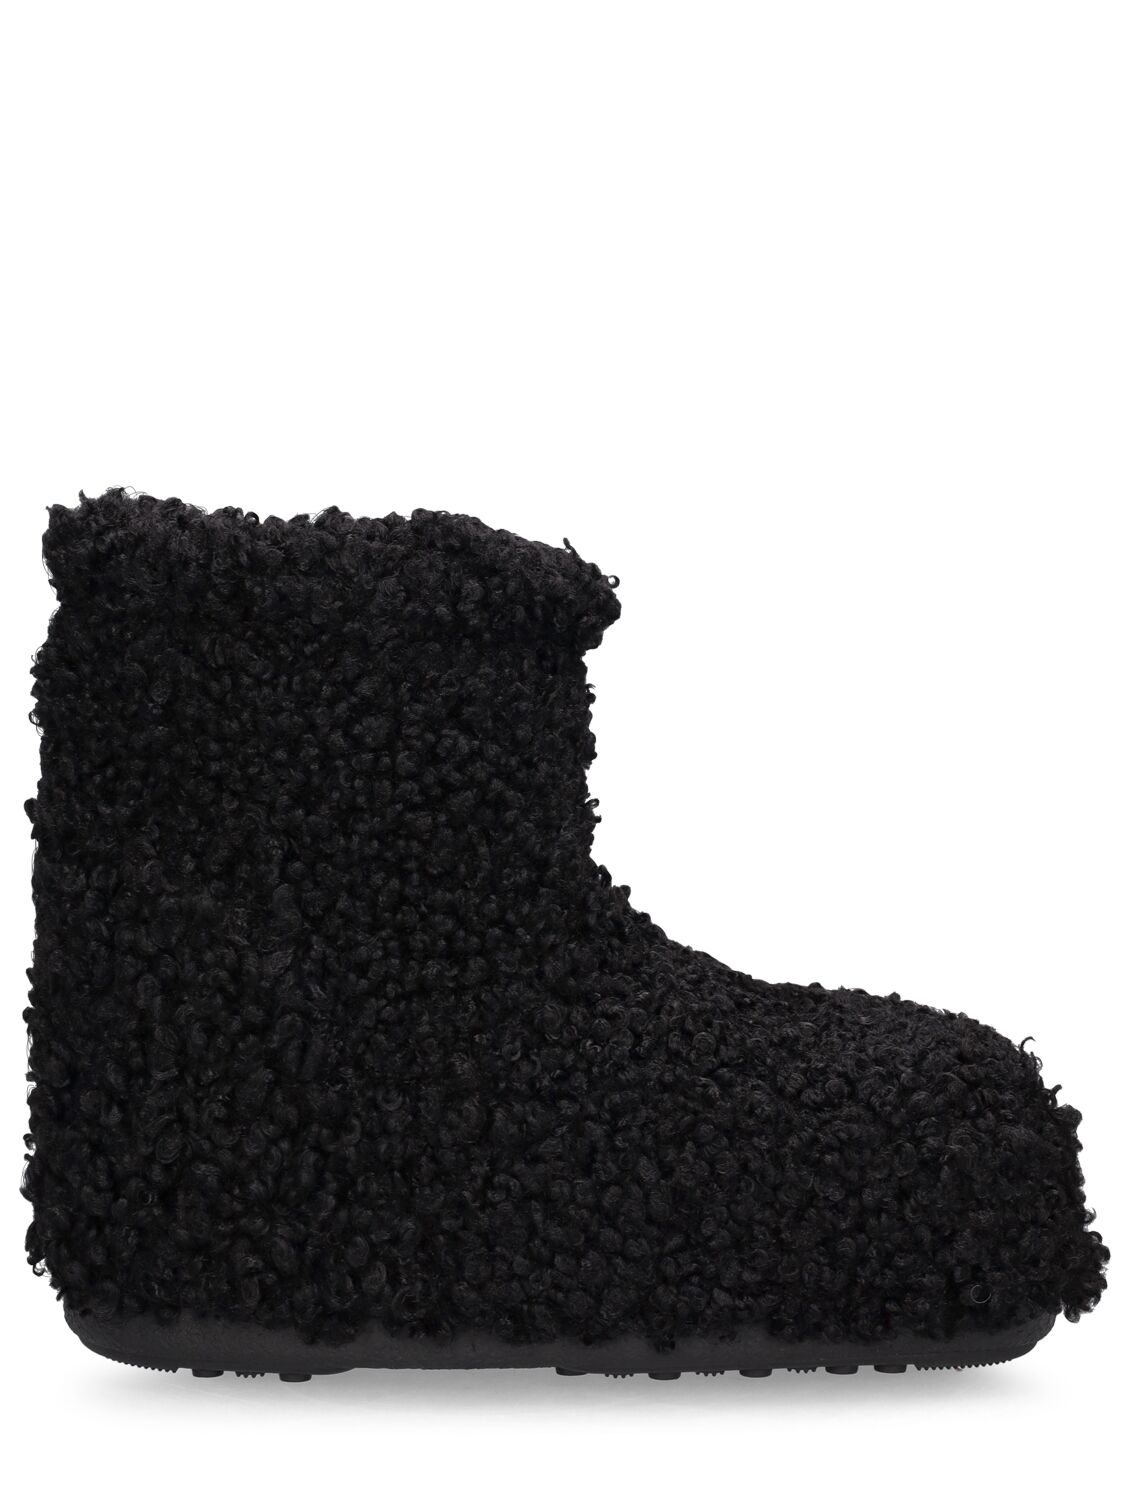 MOON BOOT LOW ICON FAUX FUR MOON BOOTS